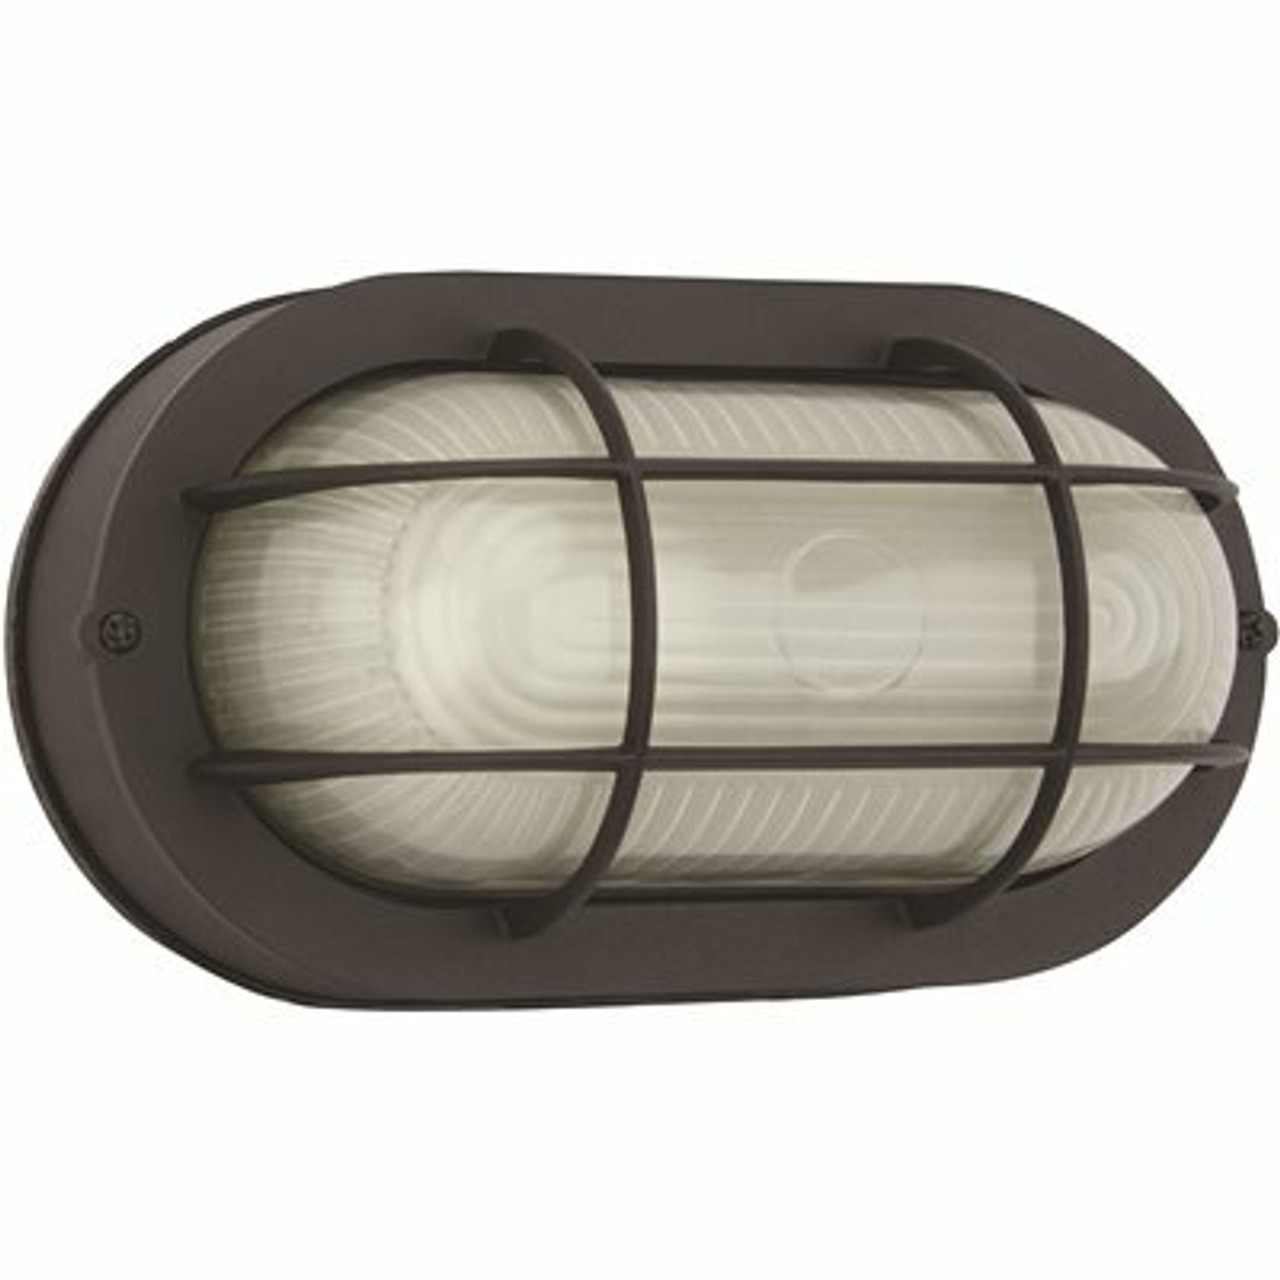 Royal Cove Medium 1-Light Black Outdoor Wall Or Ceiling Mounted Fixture Bulkhead With Frosted Glass